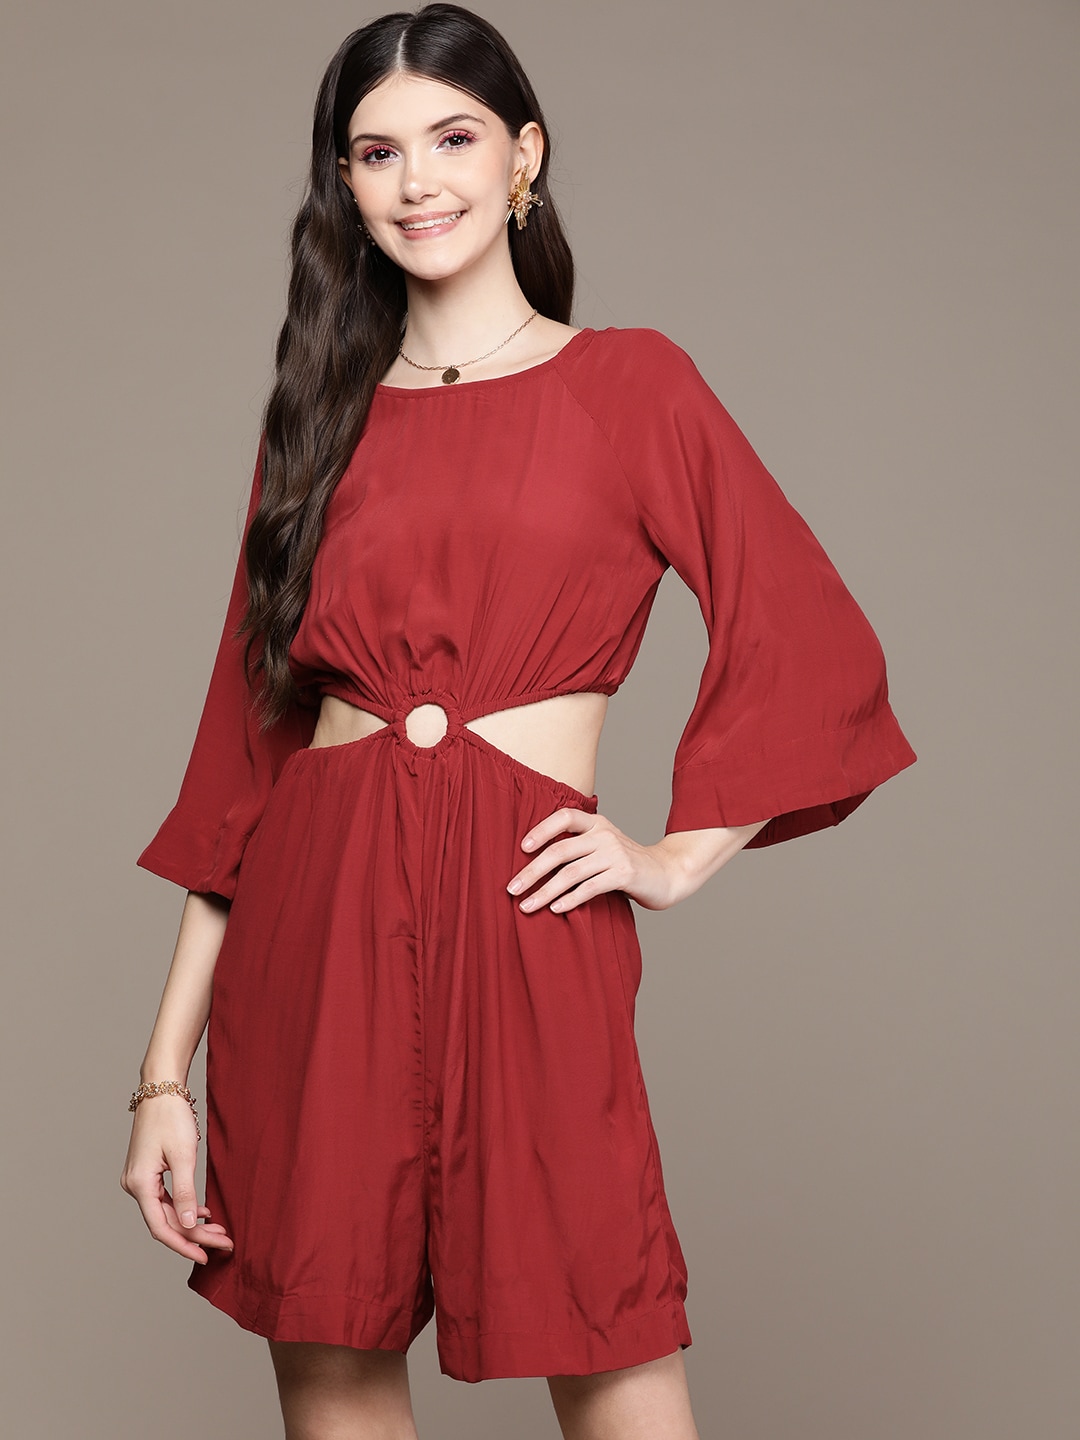 Label Ritu Kumar Red Cut Out Play suit Price in India